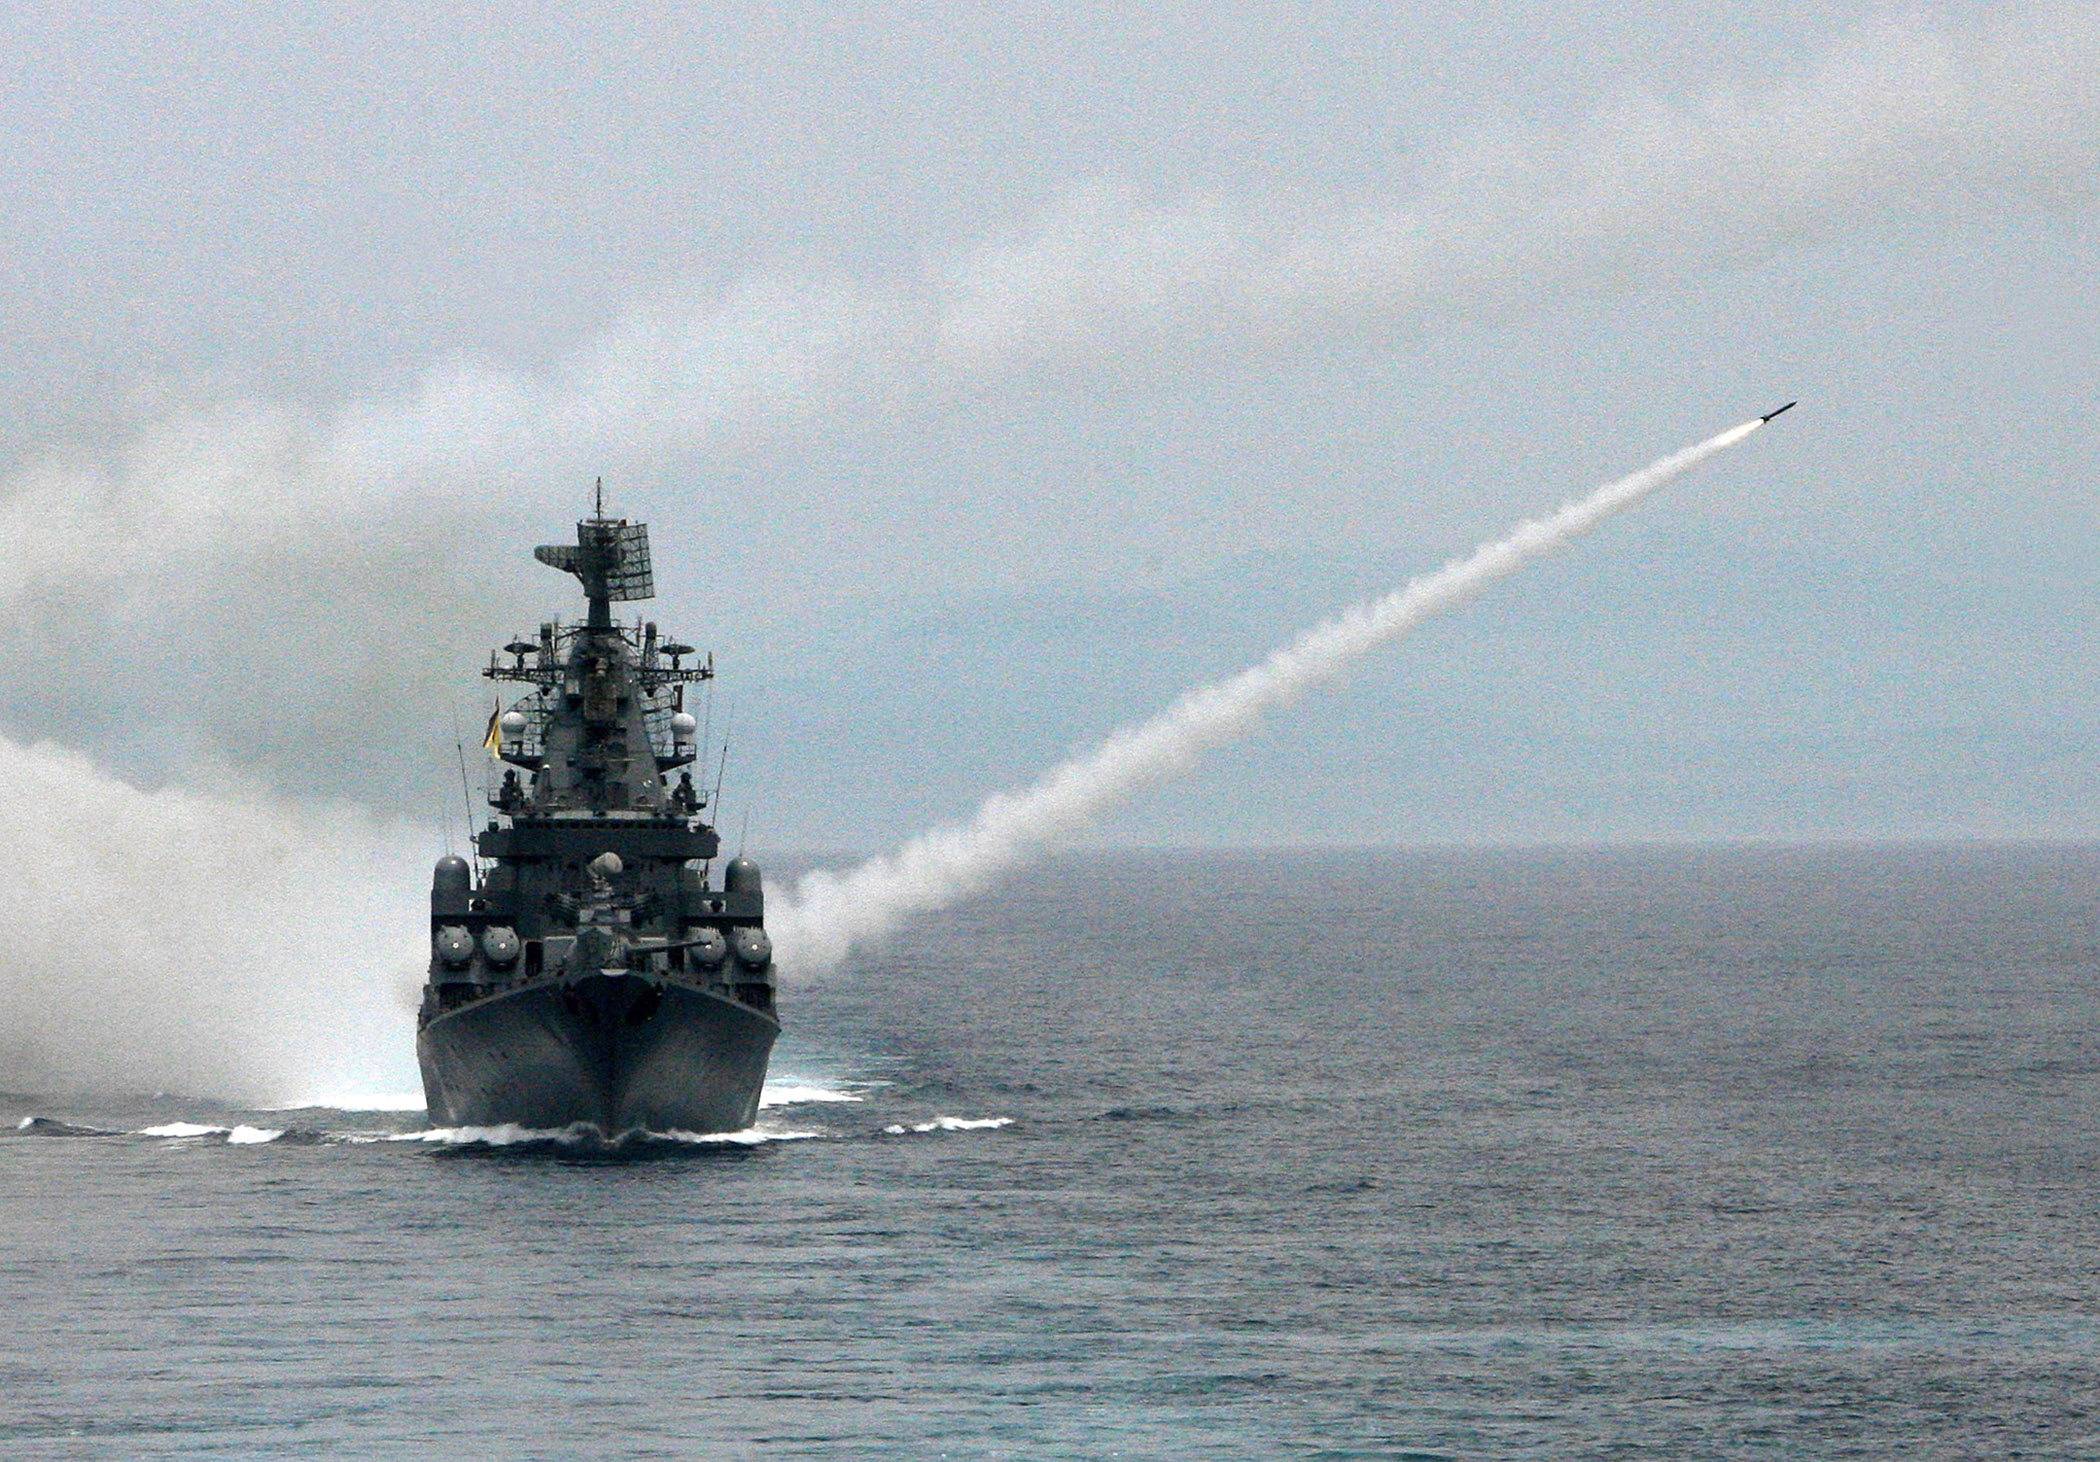 Russia has lost its Moskva warship in Ukraine. How will it impact Moscow’s war?